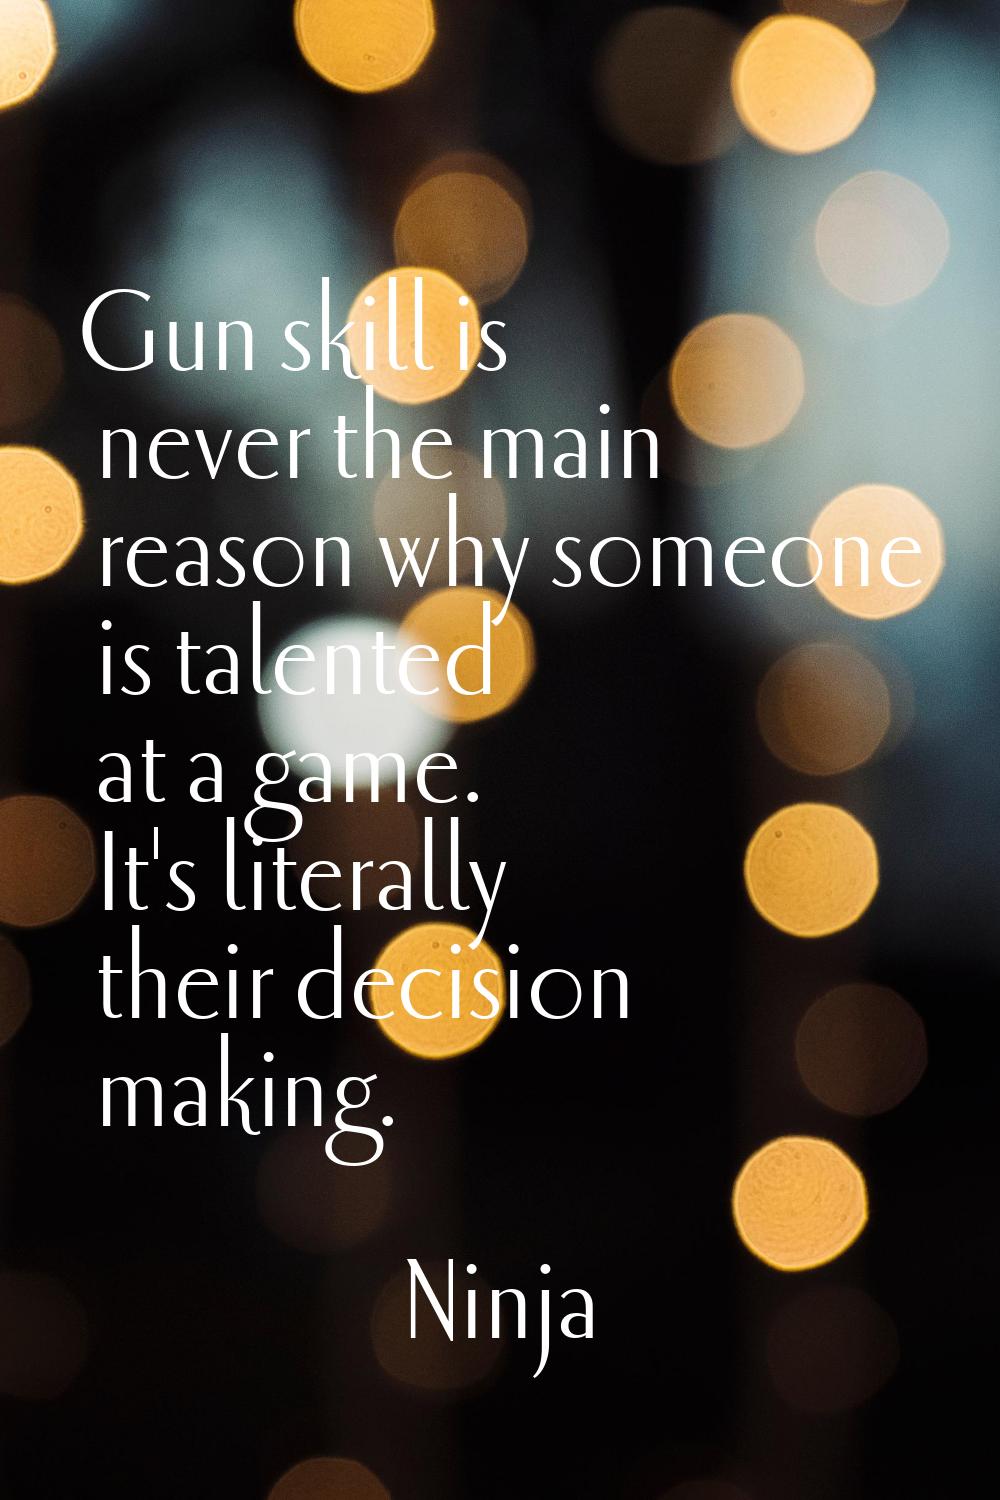 Gun skill is never the main reason why someone is talented at a game. It's literally their decision